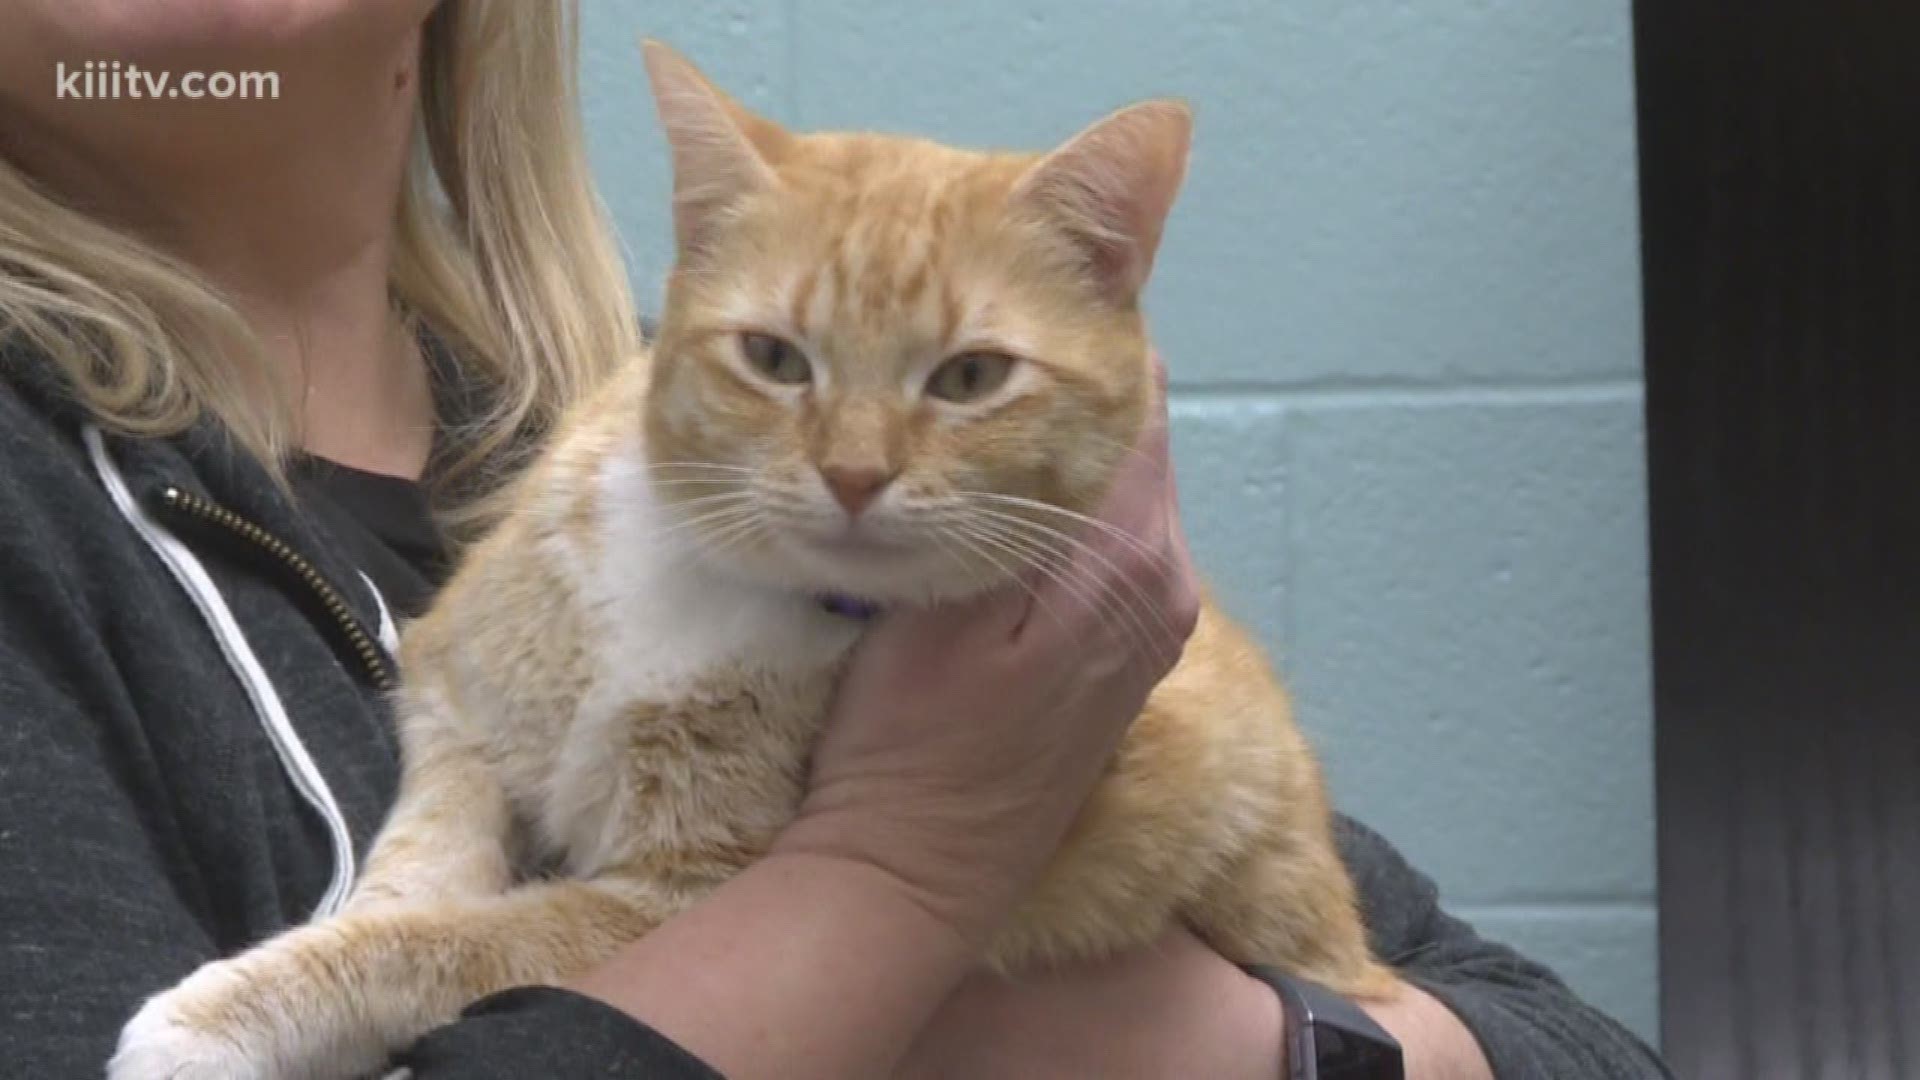 Adopt this week from The Gulf Coast Humane Society.